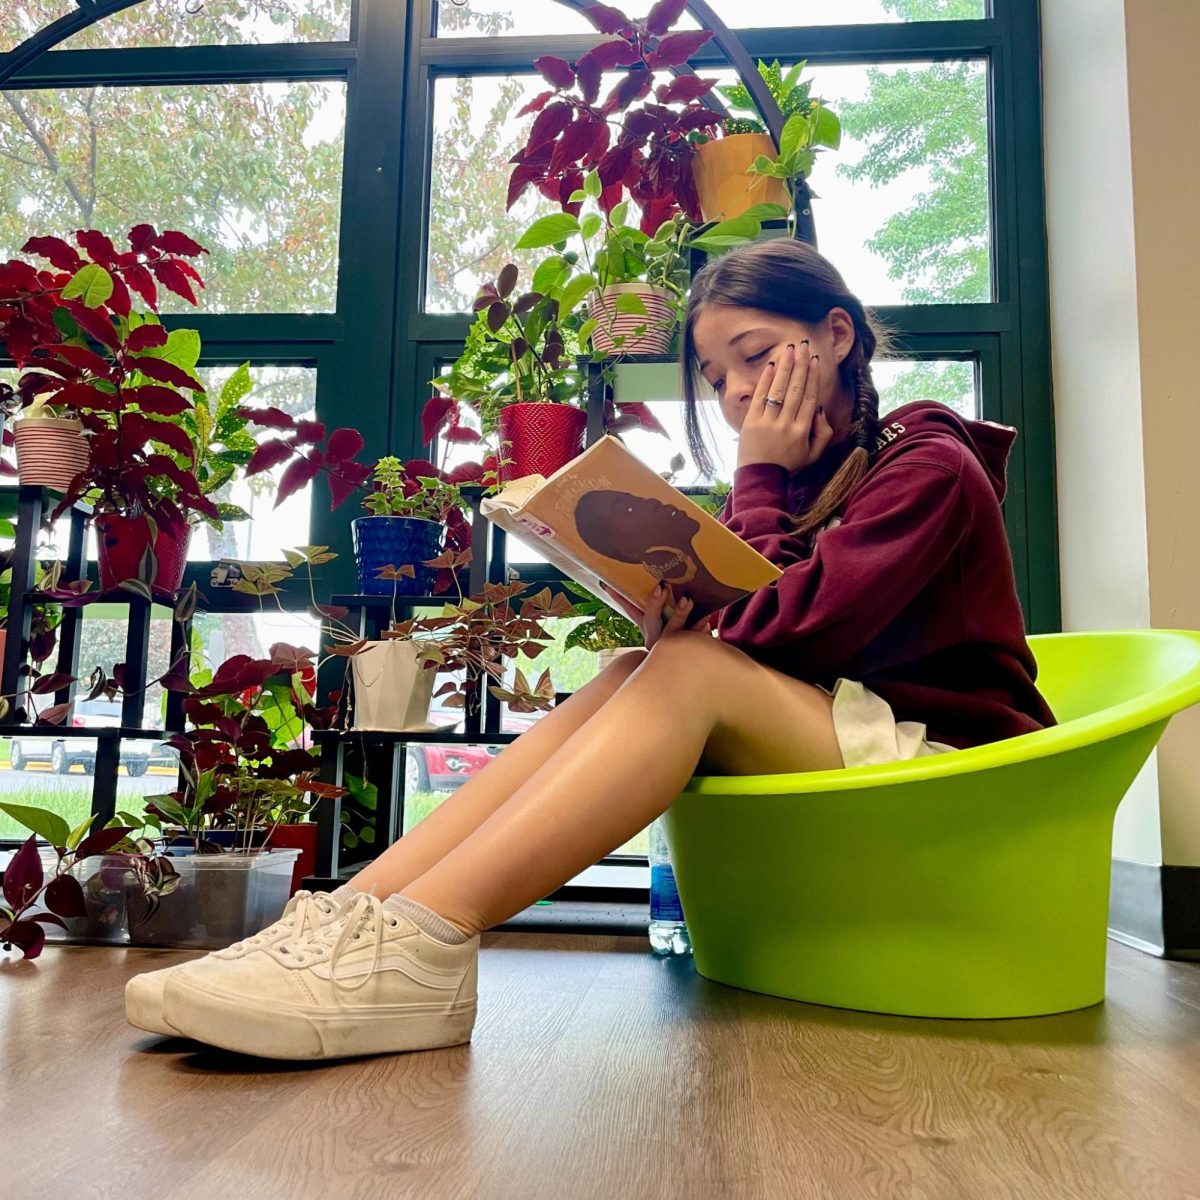 Senior Kaitlyn Ornelas sits comfortably in the NHS library. One of her favorite ways to relax during the summer is to read.  “I read all the time,” Ornelas said. “It’s a good way to chill and spend my time.”